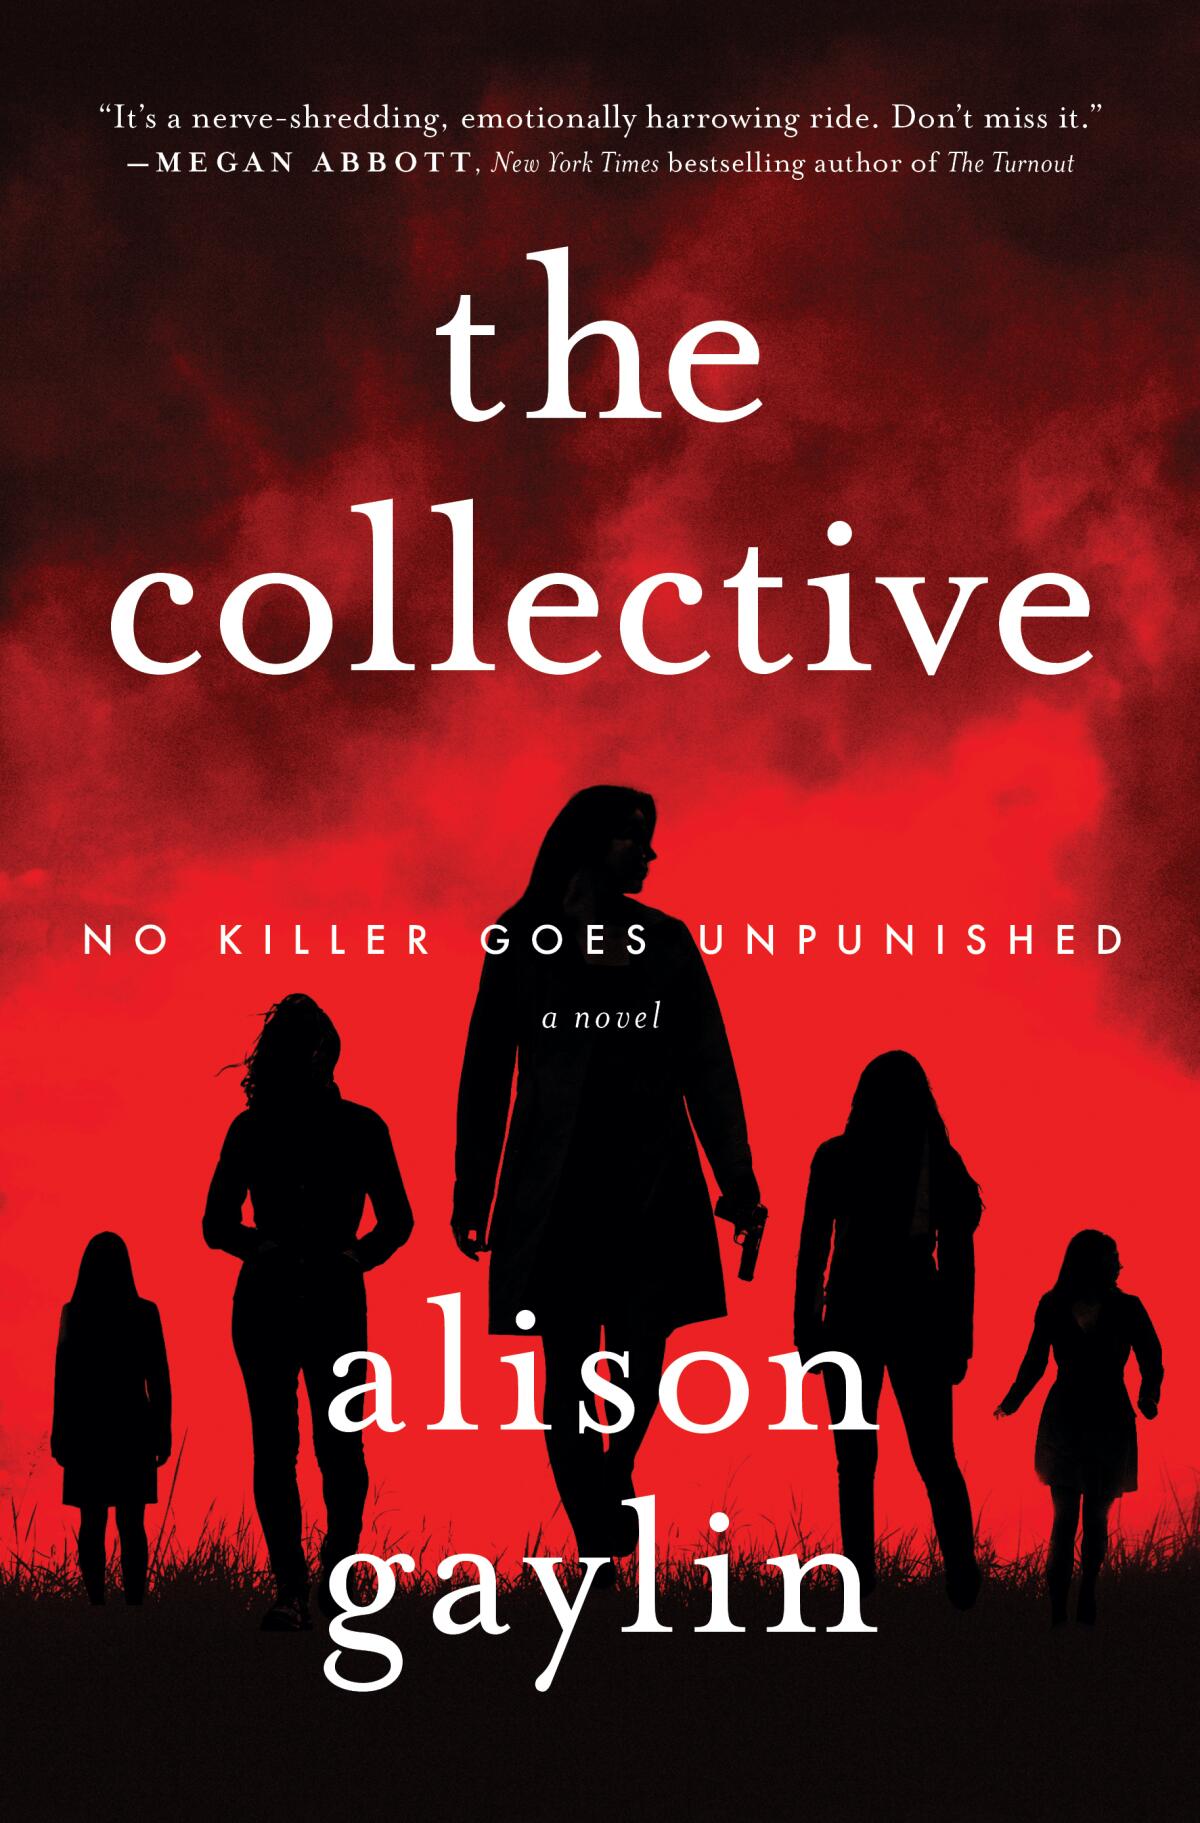 Five silhouetted women against a red background on the cover of "The Collective," by Alison Gaylin.